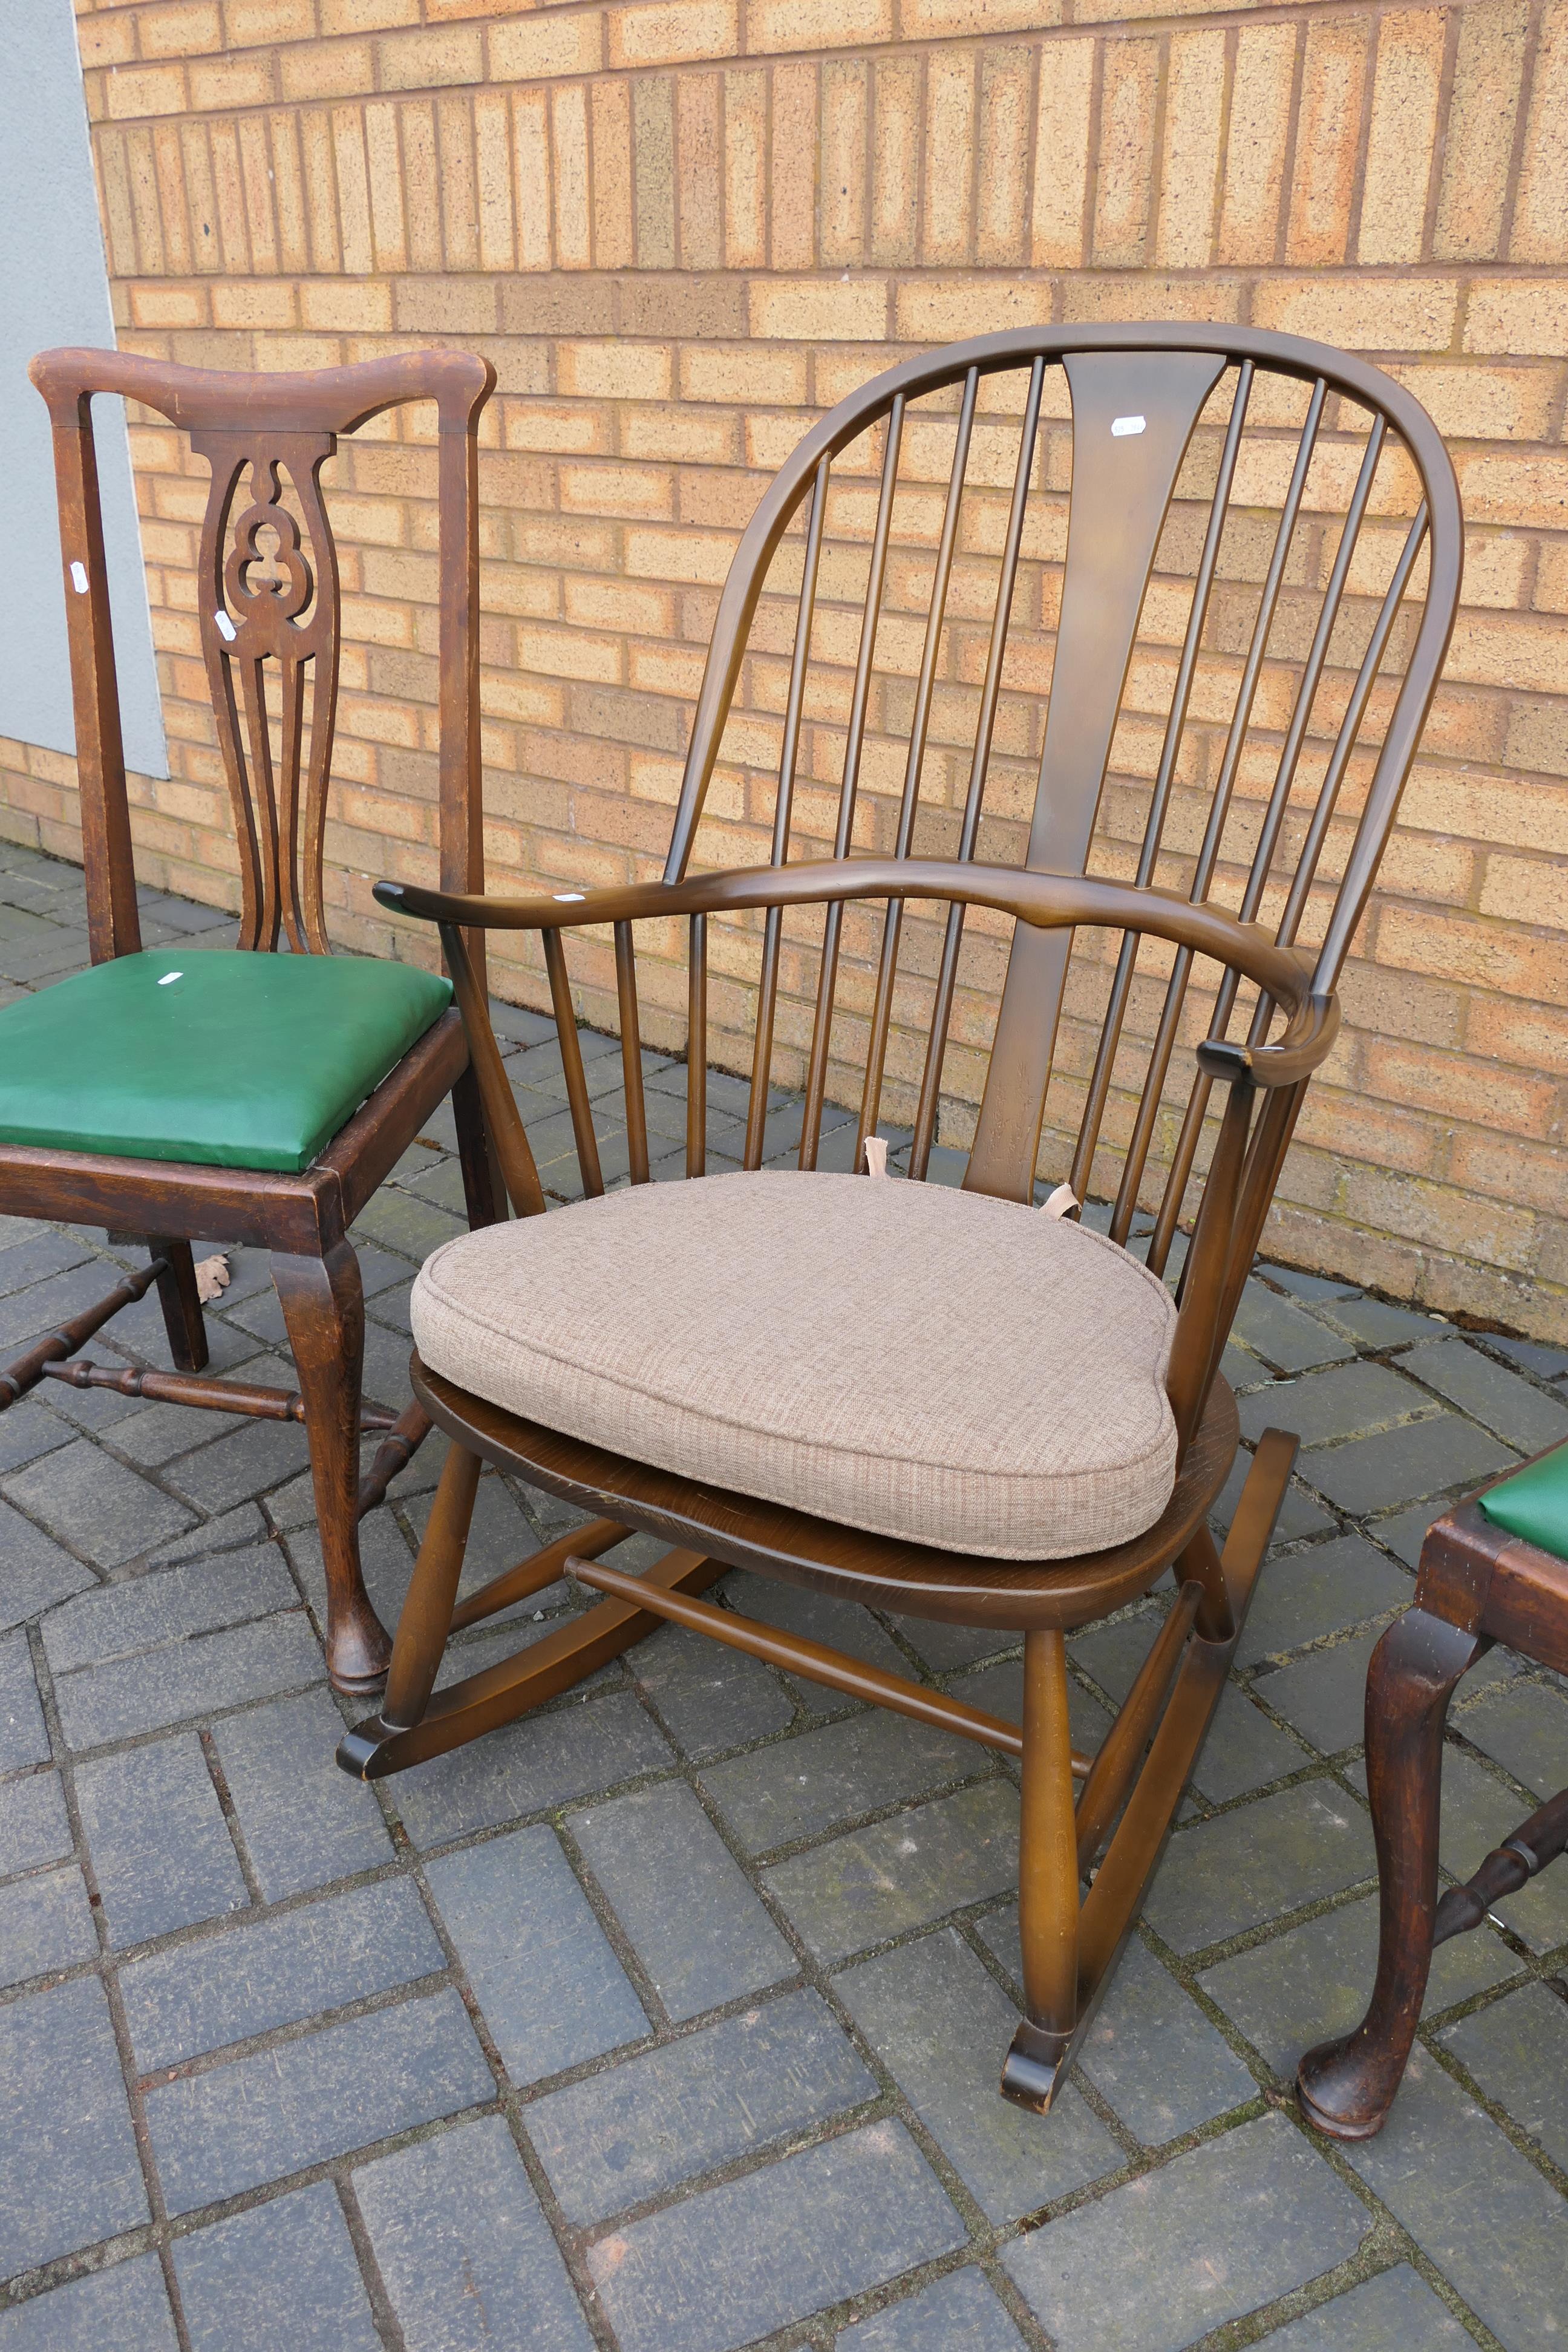 Ercol - An Ercol Chairmakers Windsor rocking chair (gold label) and two dining chairs. - Image 3 of 3